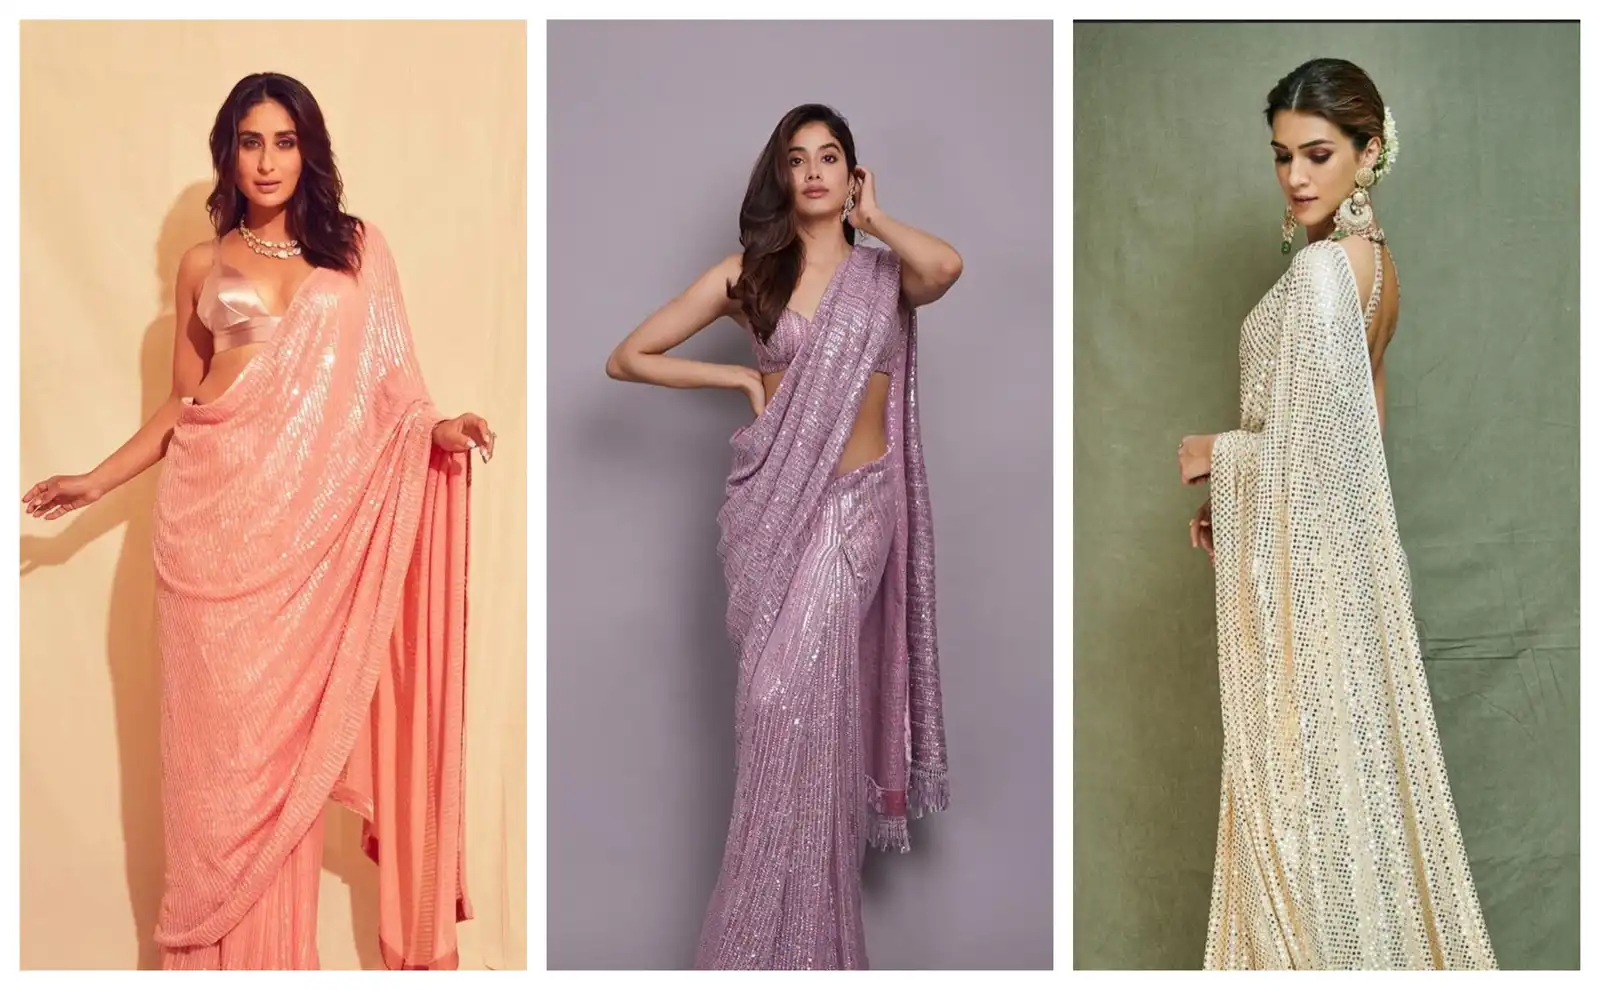 From Kareena Kapoor To Kriti Sanon, This Is The Saree That Every Bollywood Diva Is Obsessing Over